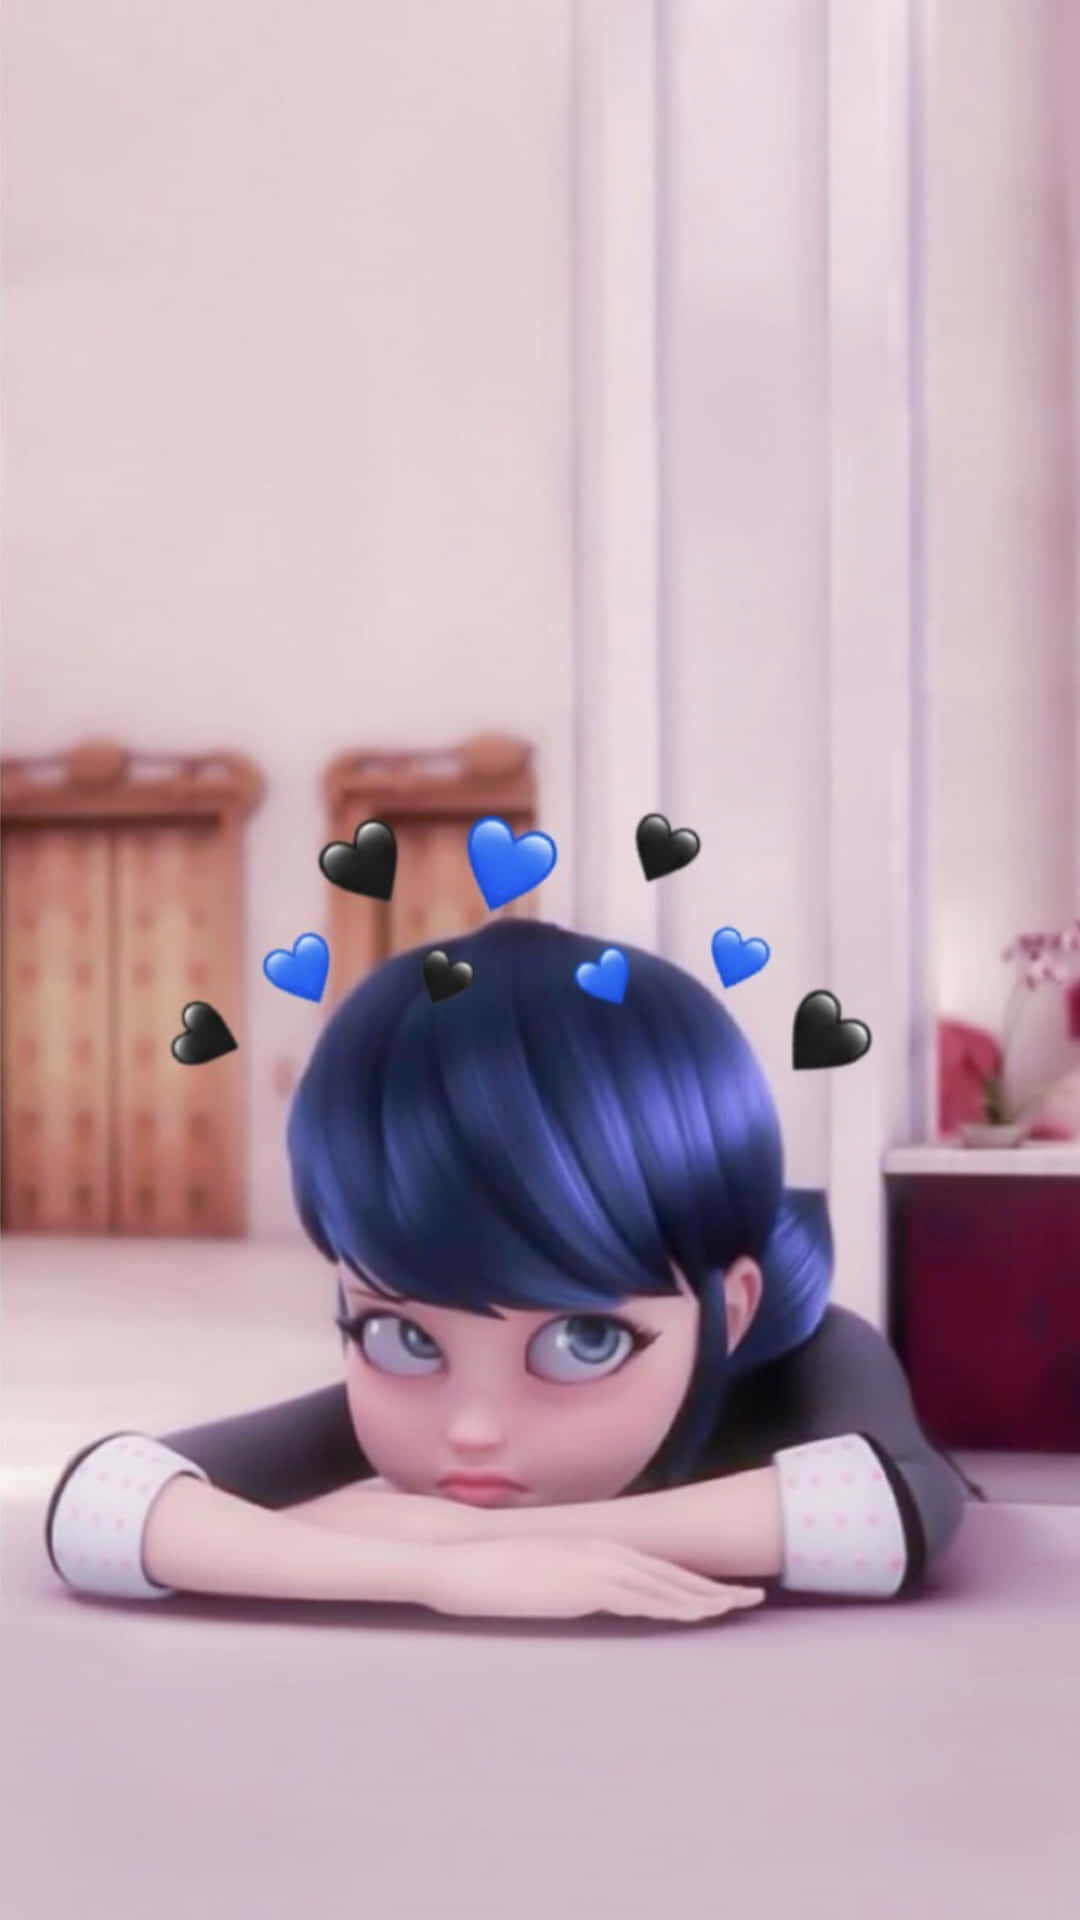 Cute Miraculous Ladybug With Blue And Black Hearts Wallpaper